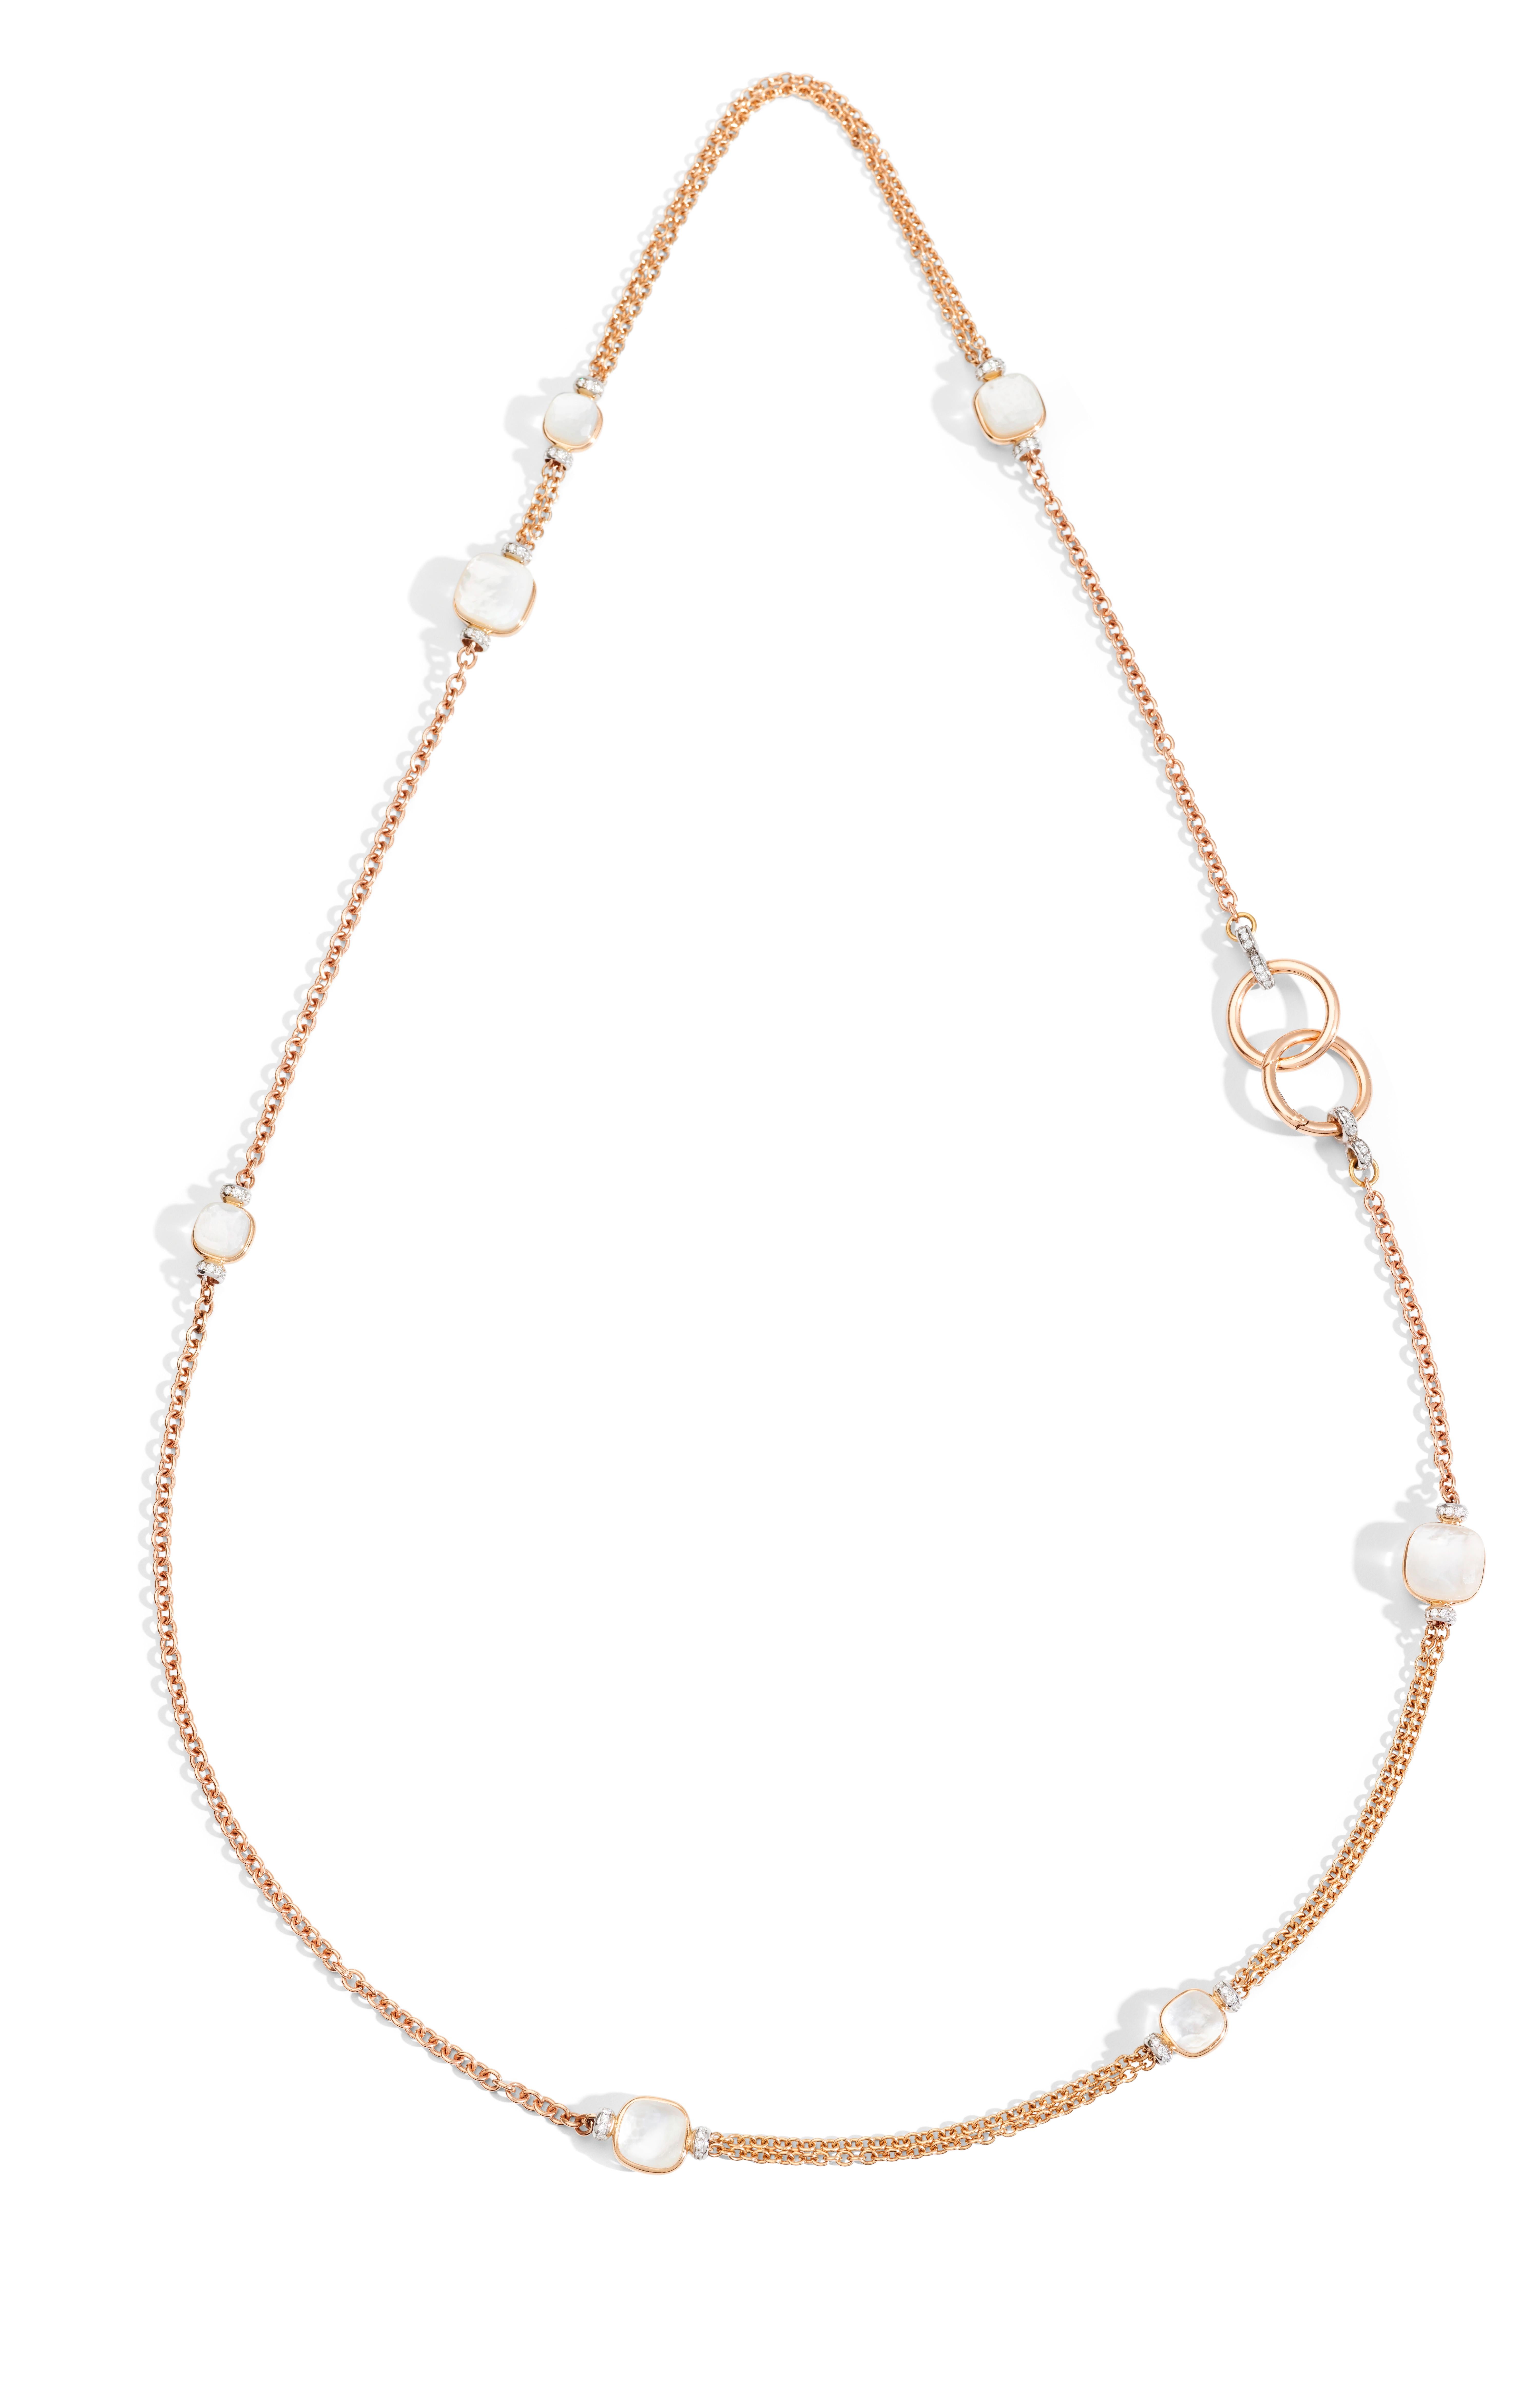 Round Cut Pomellato Nudo 18 Karat Rose Gold and Mother of Pearl Necklace